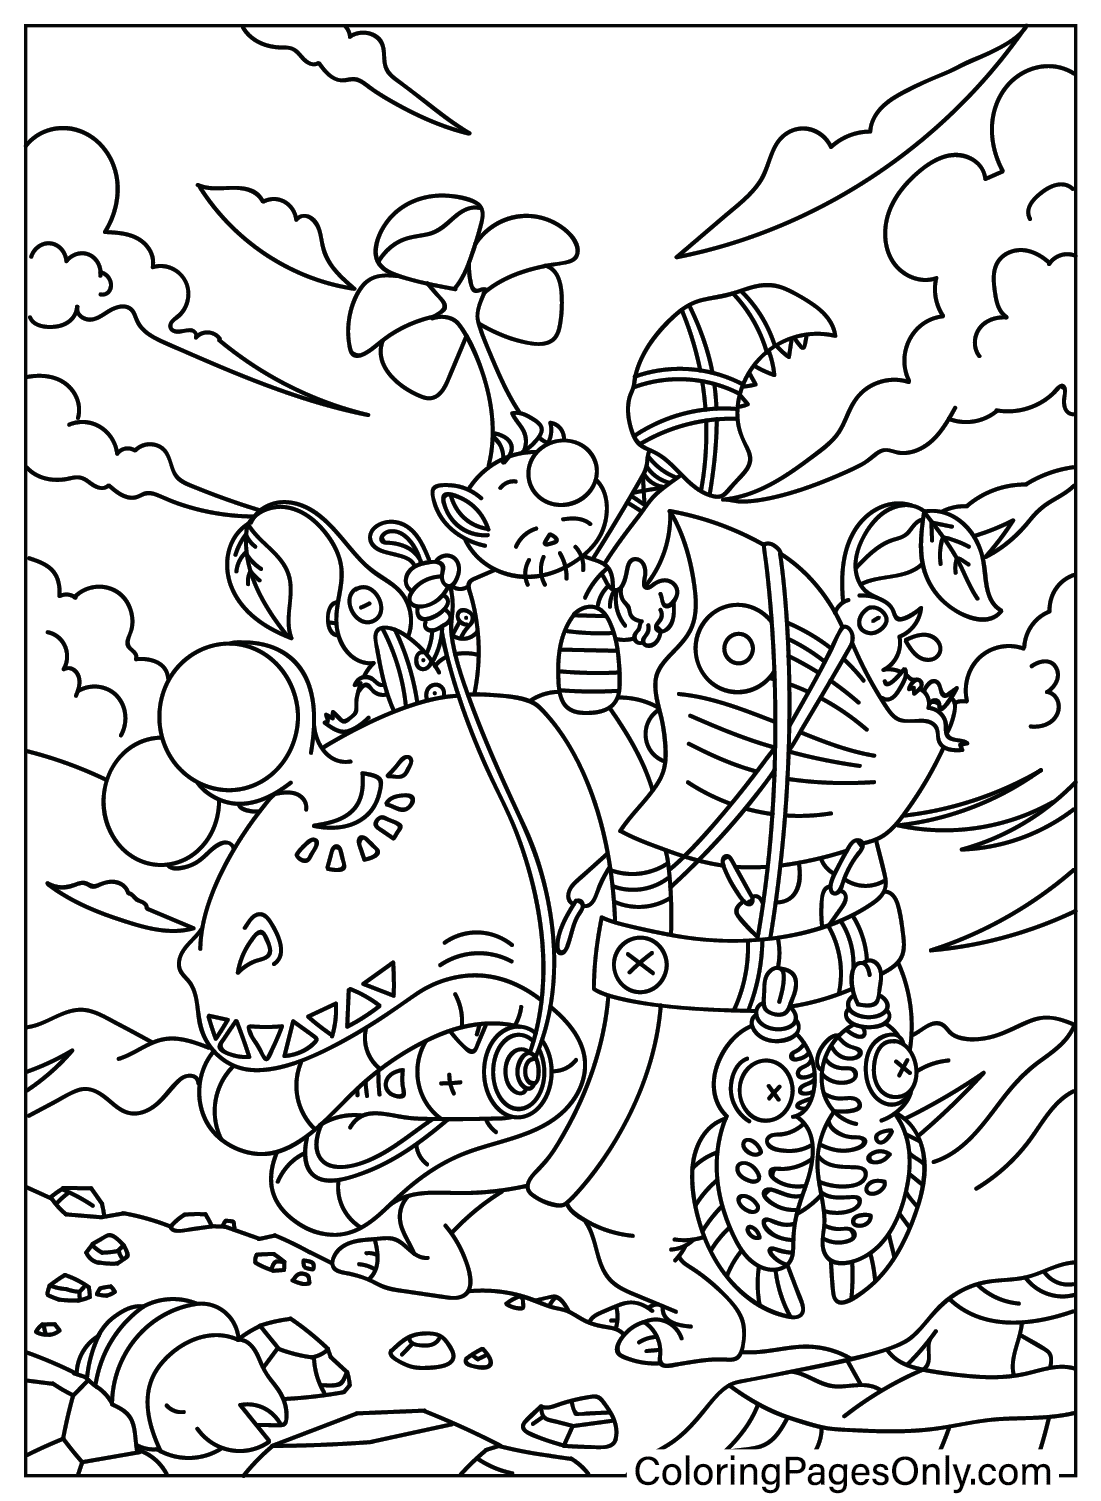 Pikmin Coloring Page for Adults from Pikmin